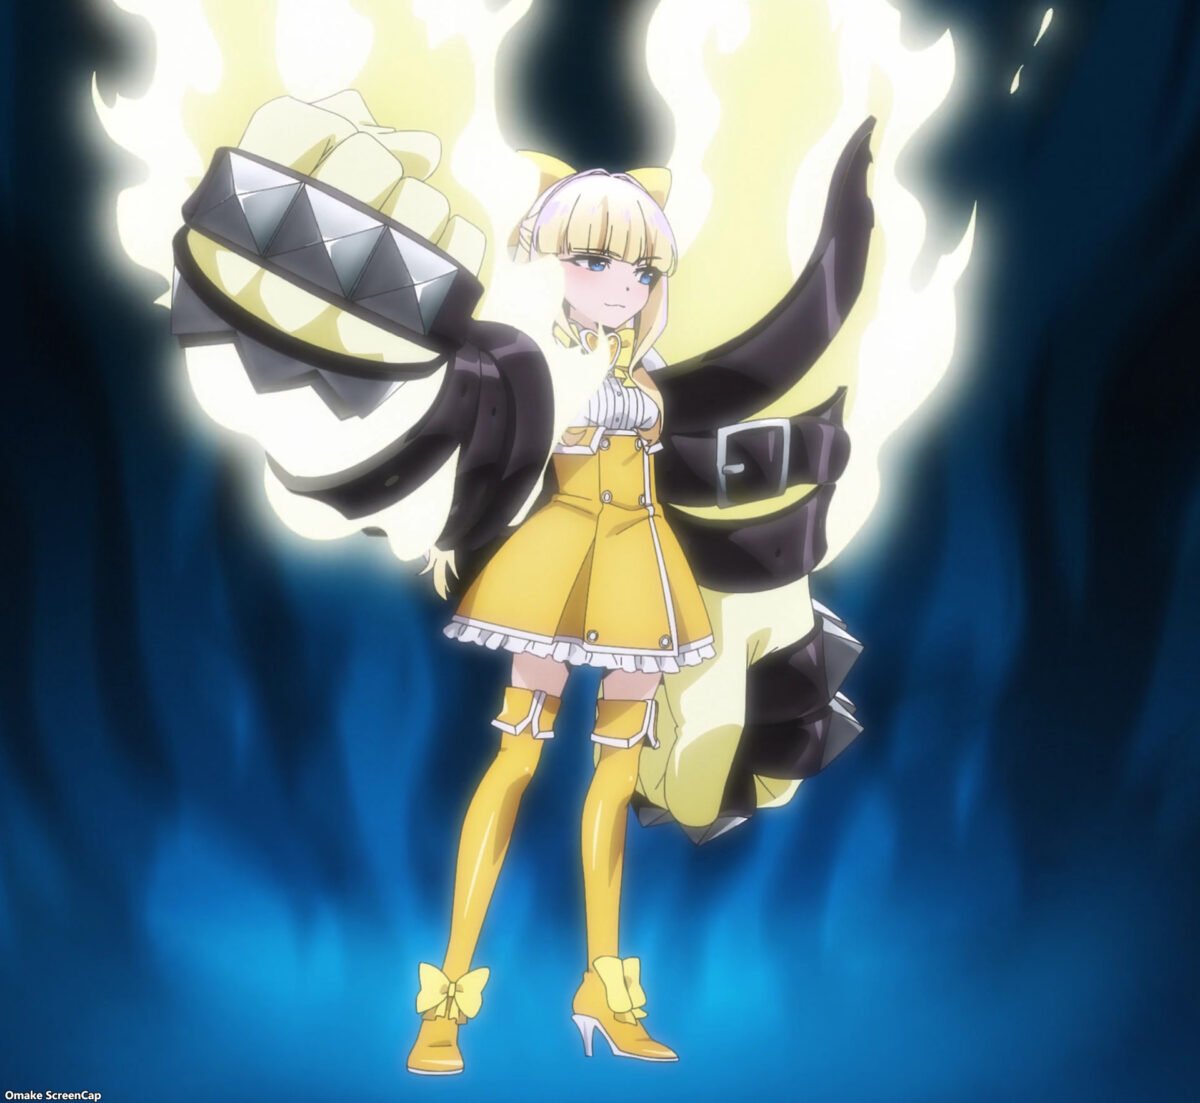 Gushing Over Magical Girls Episode 4 Magia Sulfur Big Fists